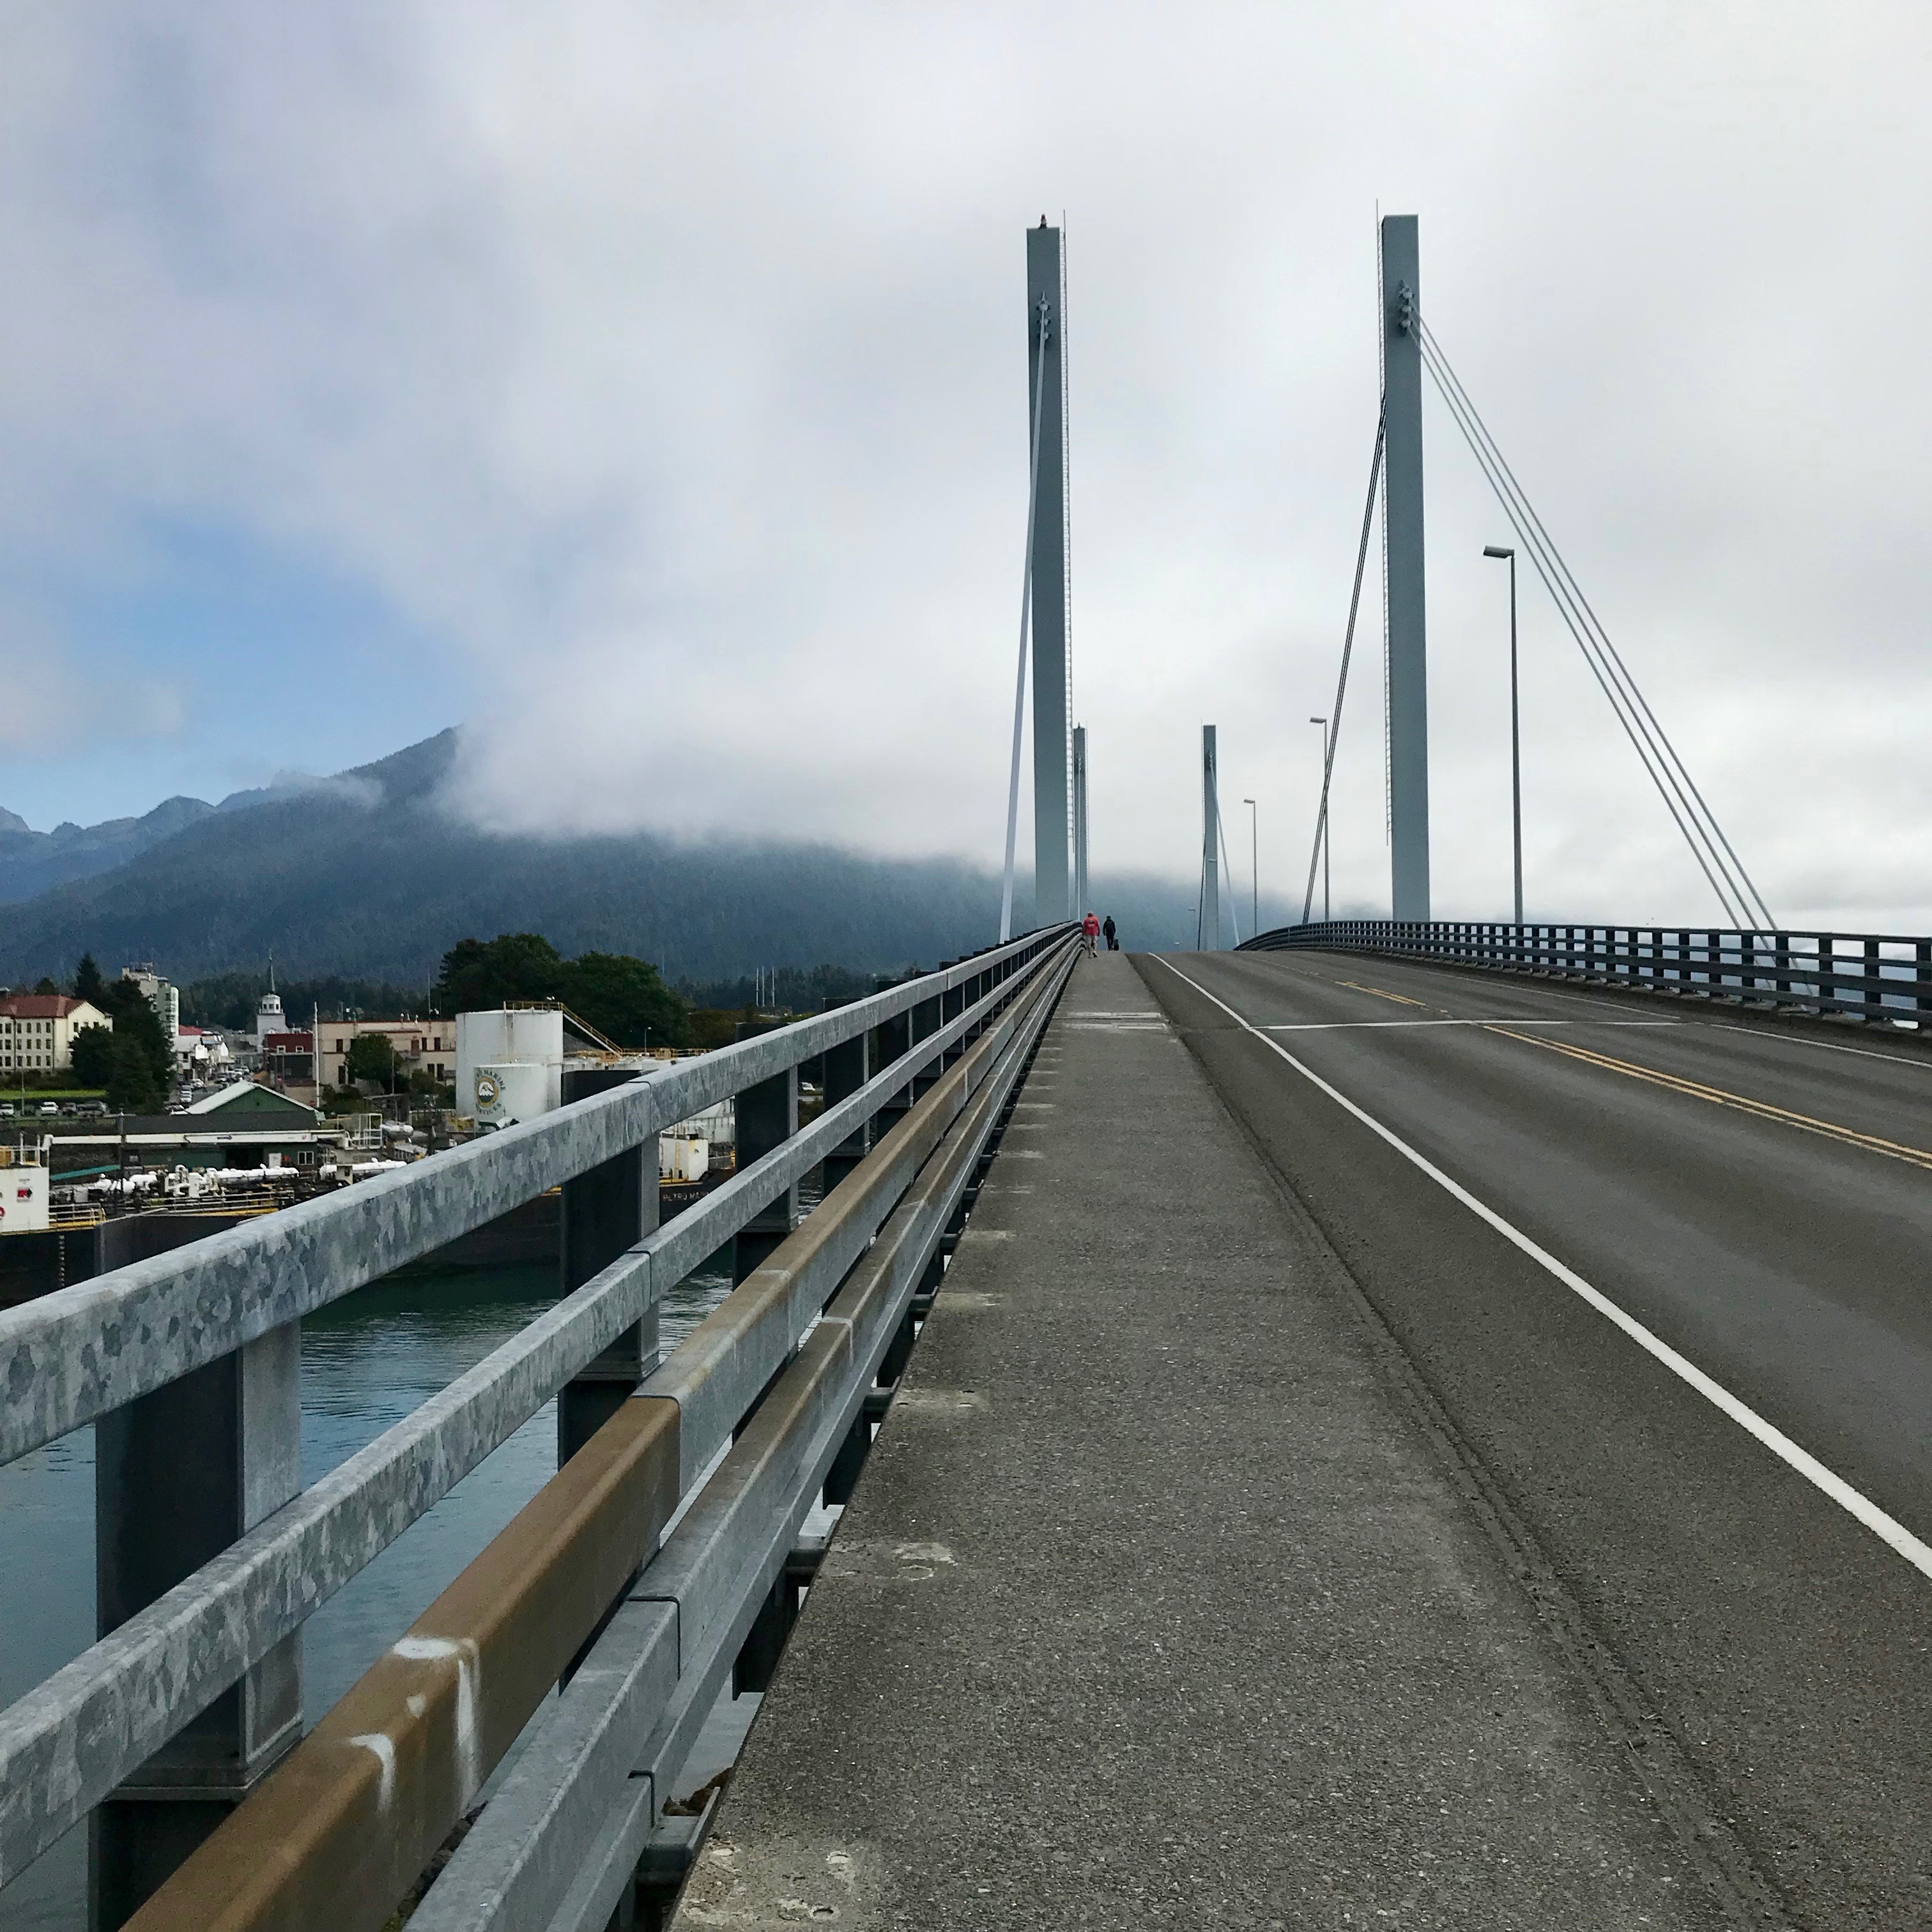 This bridge is the key architectural feature of Sitka, connecting the airport area and high school to the main part of town.  